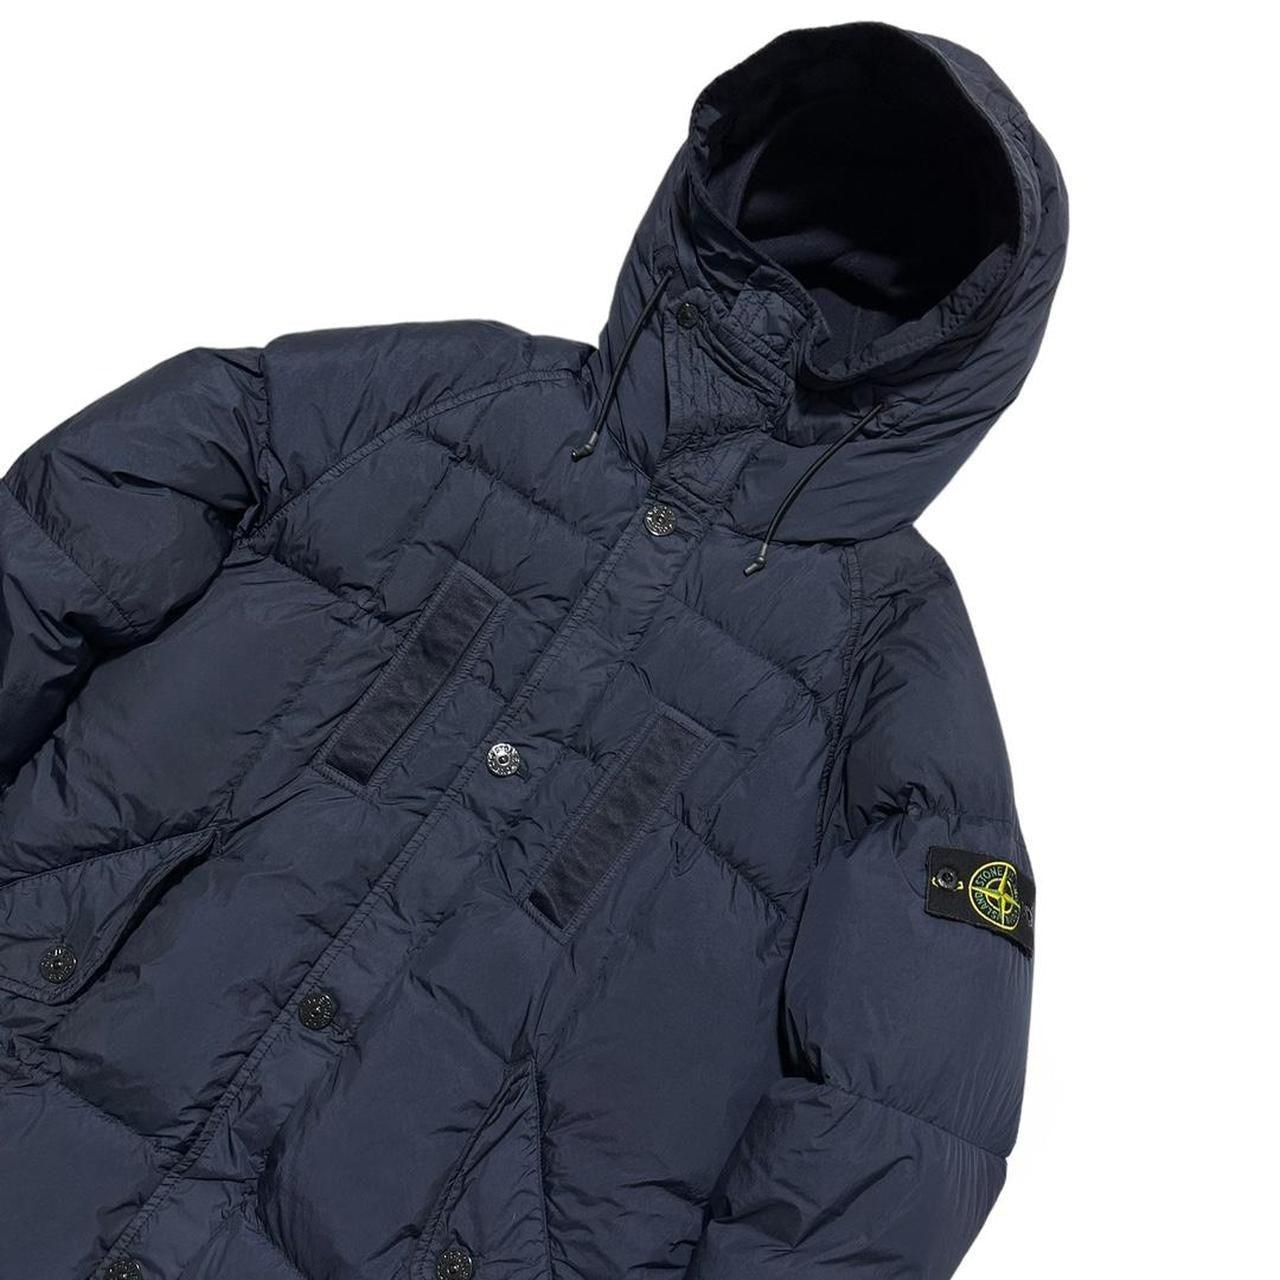 Stone Island Garment Dyed Crinkle Reps NY Down Jacket. - Known Source